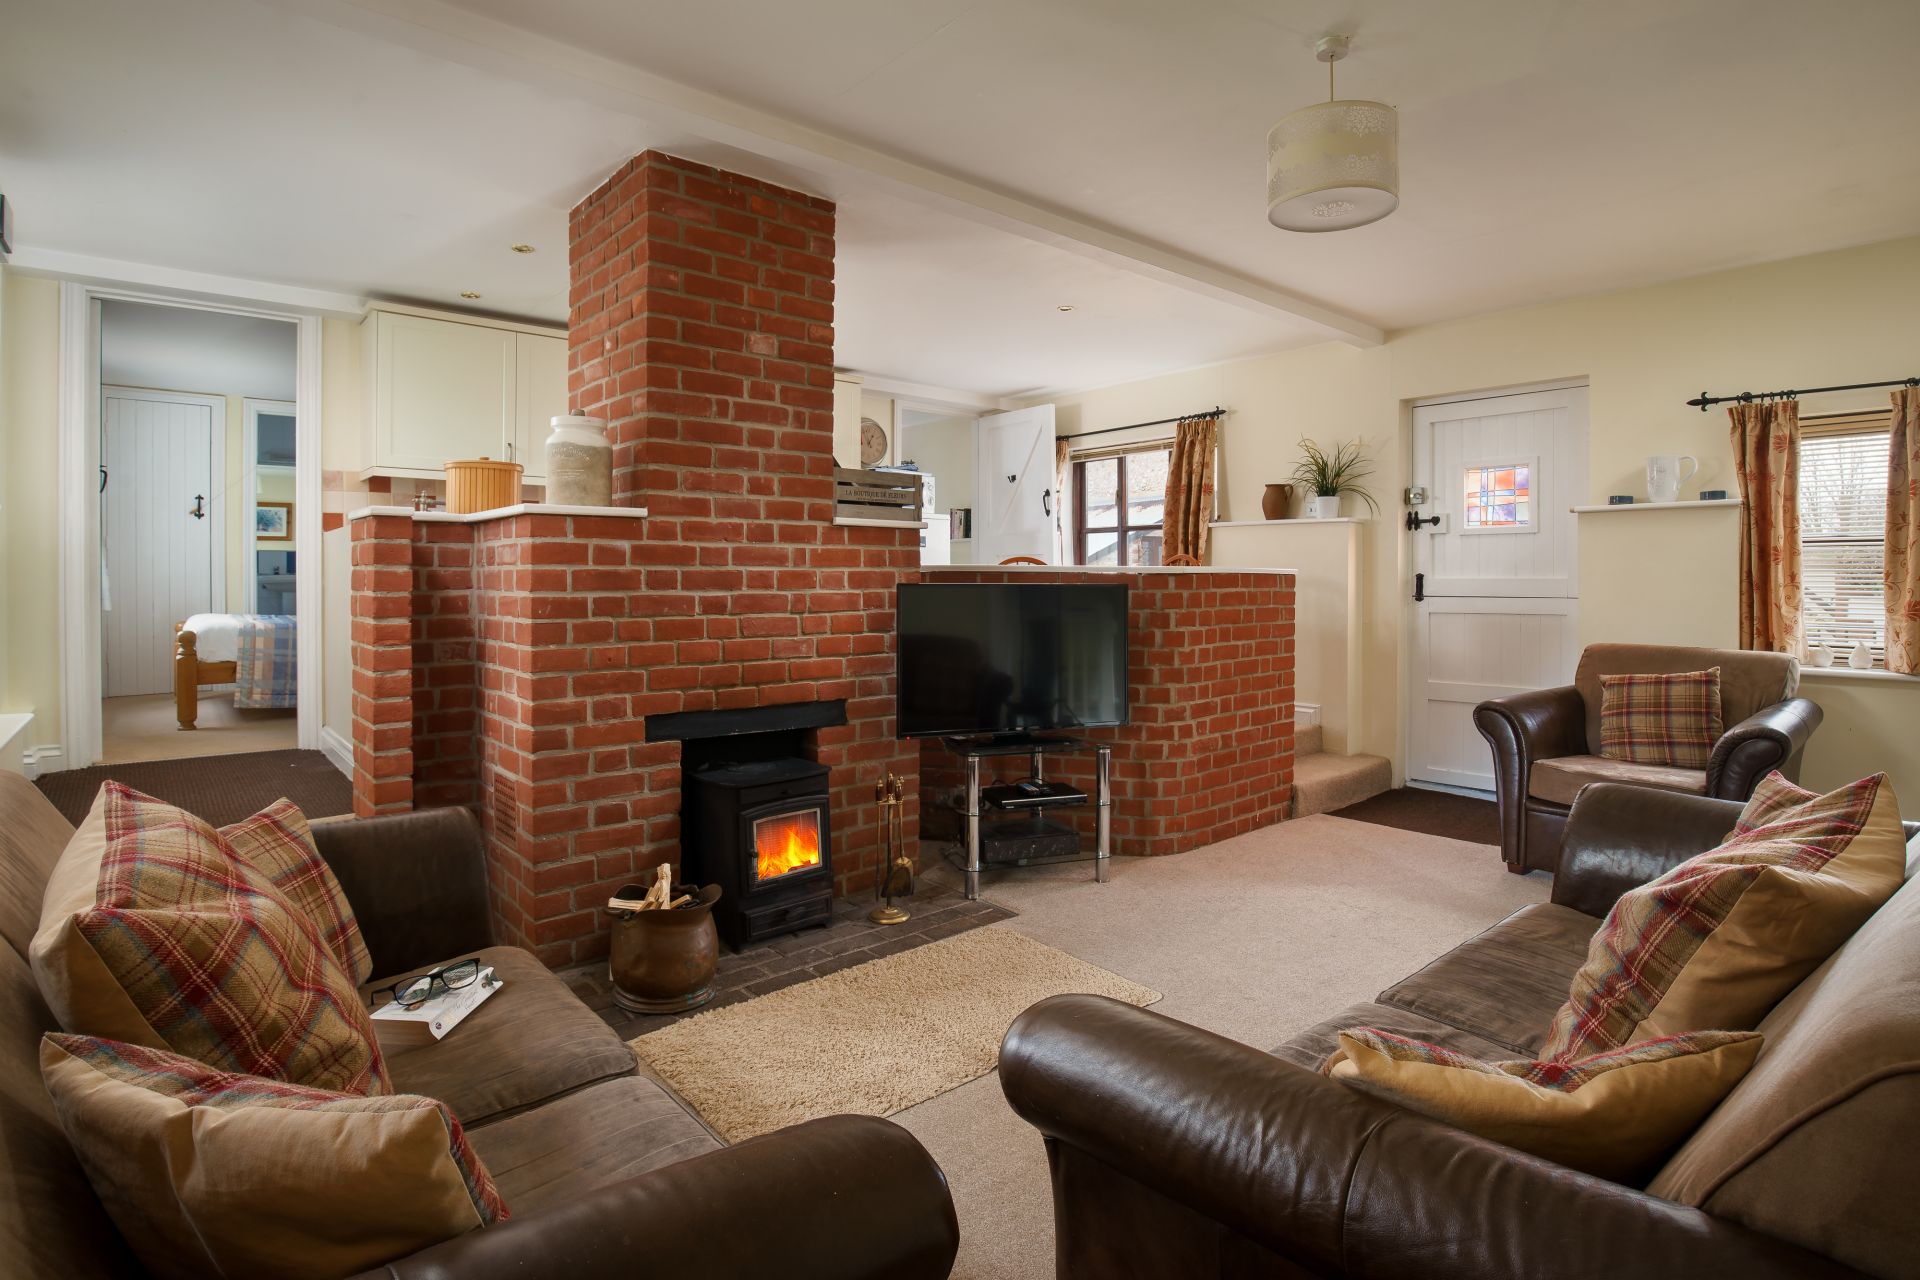 Blackbird Cottage is located in Lyme Regis and surrounding villages